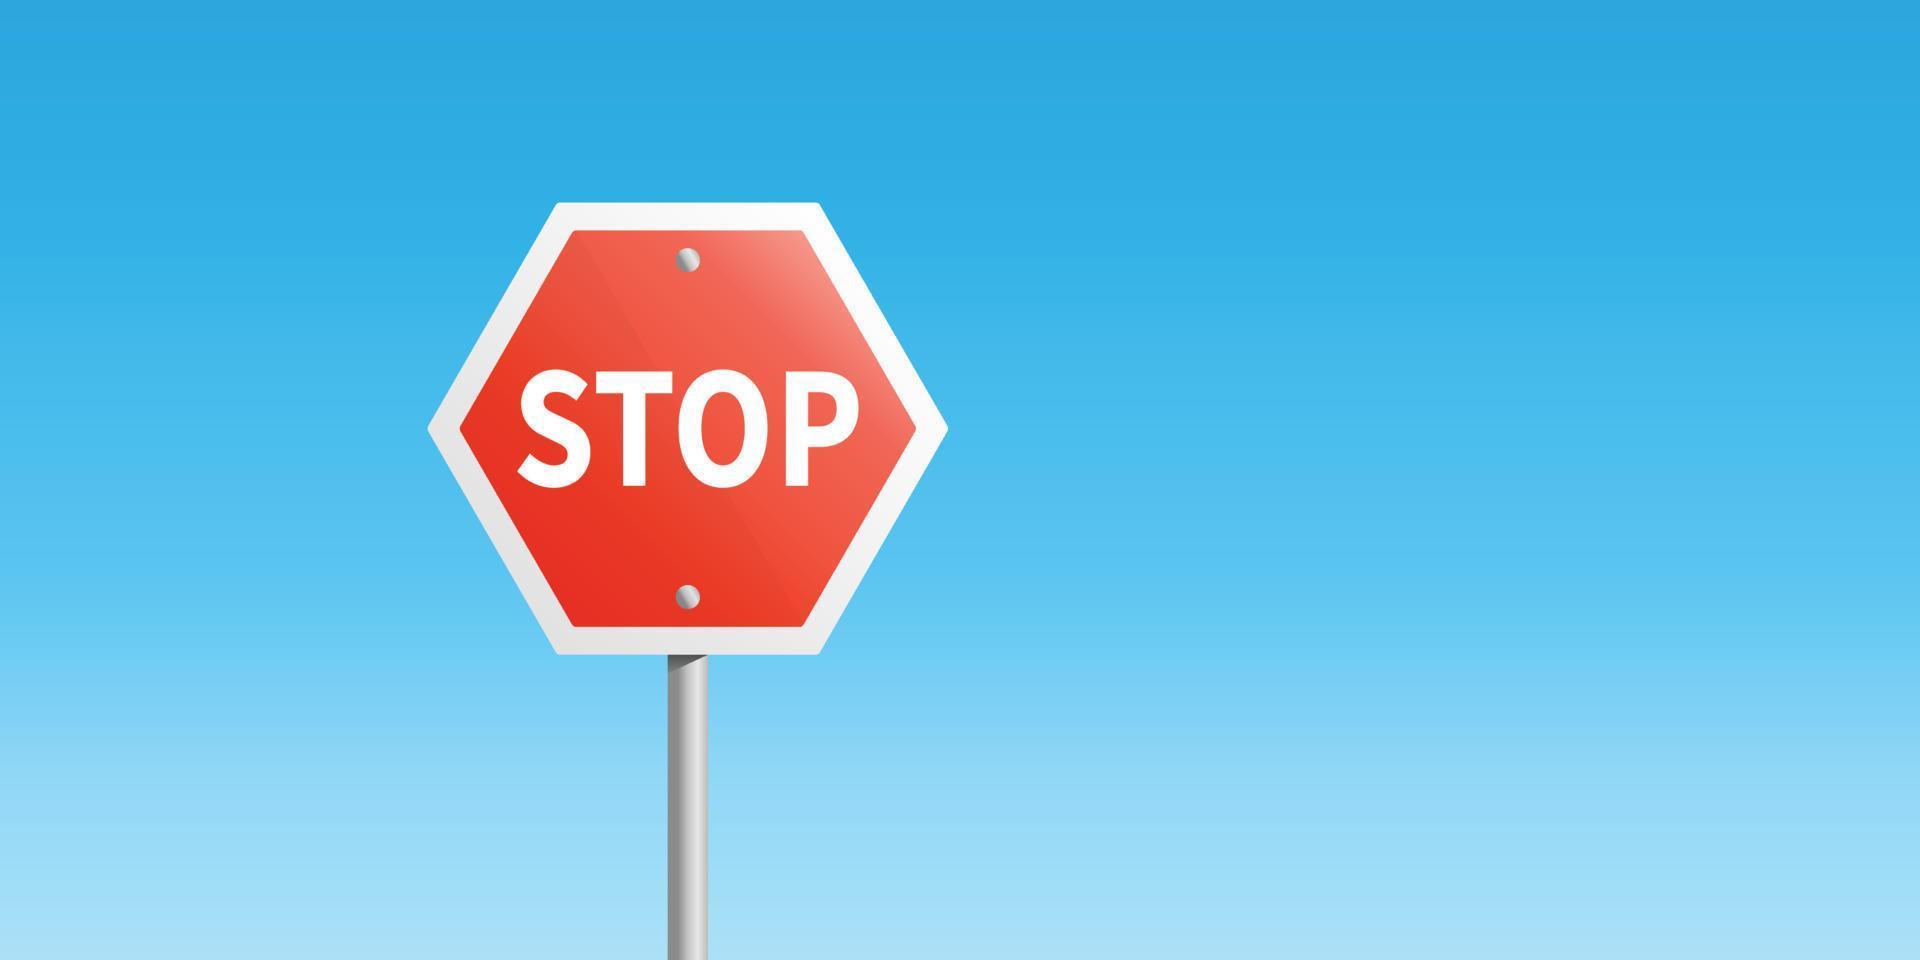 Red stop sign and blue sky background. vector